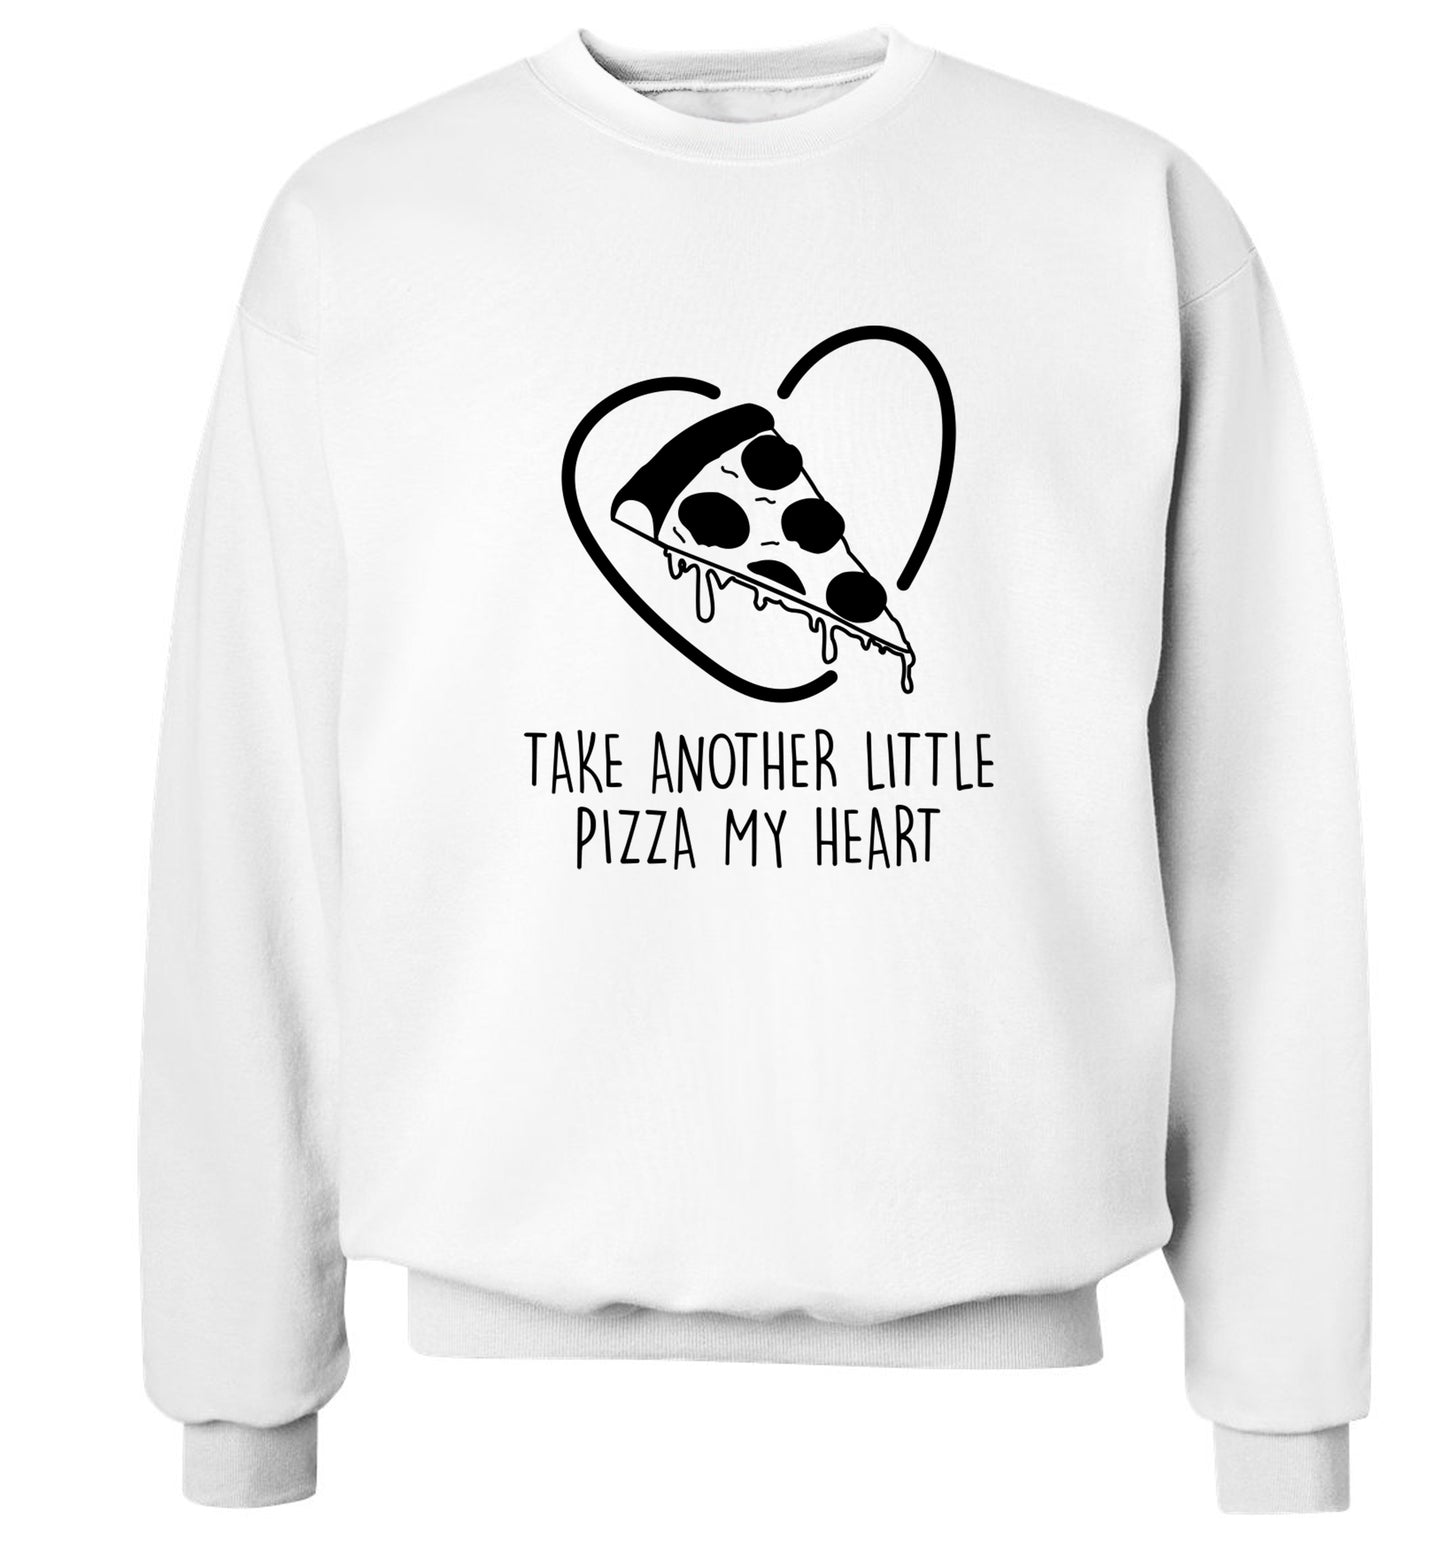 Take another little pizza my heart Adult's unisex white Sweater 2XL